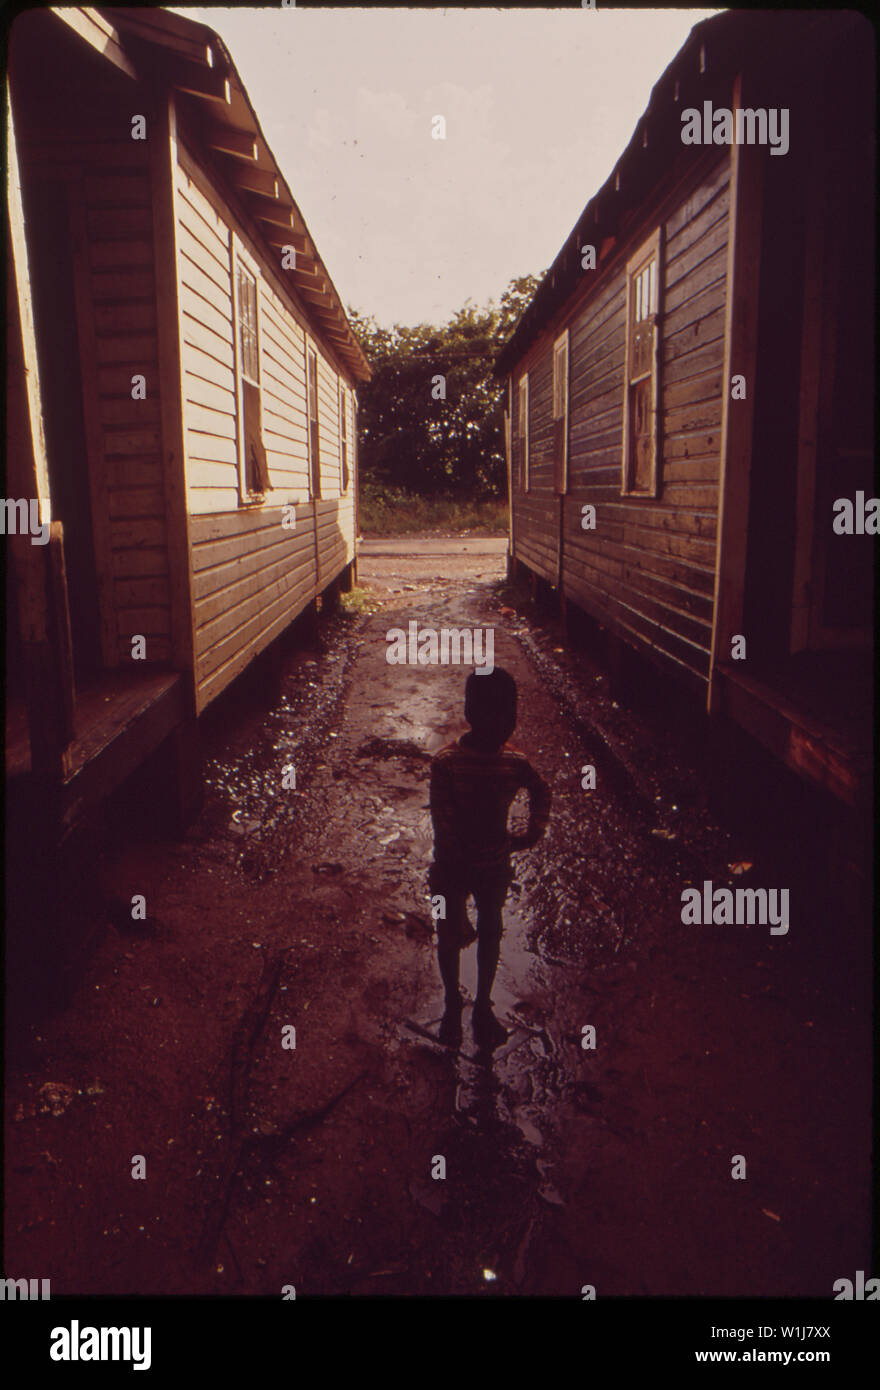 Scene in Little Korea, in South Birmingham. Despite the significant progress of recent years, many Birmingham blacks still live in areas of substandard housing of which this is a prime example. Several creeks flow through the community. During heavy rains, these are apt to overflow, and residents must often be evacuated. Birmingham, Alabama. July, 1972 Stock Photo